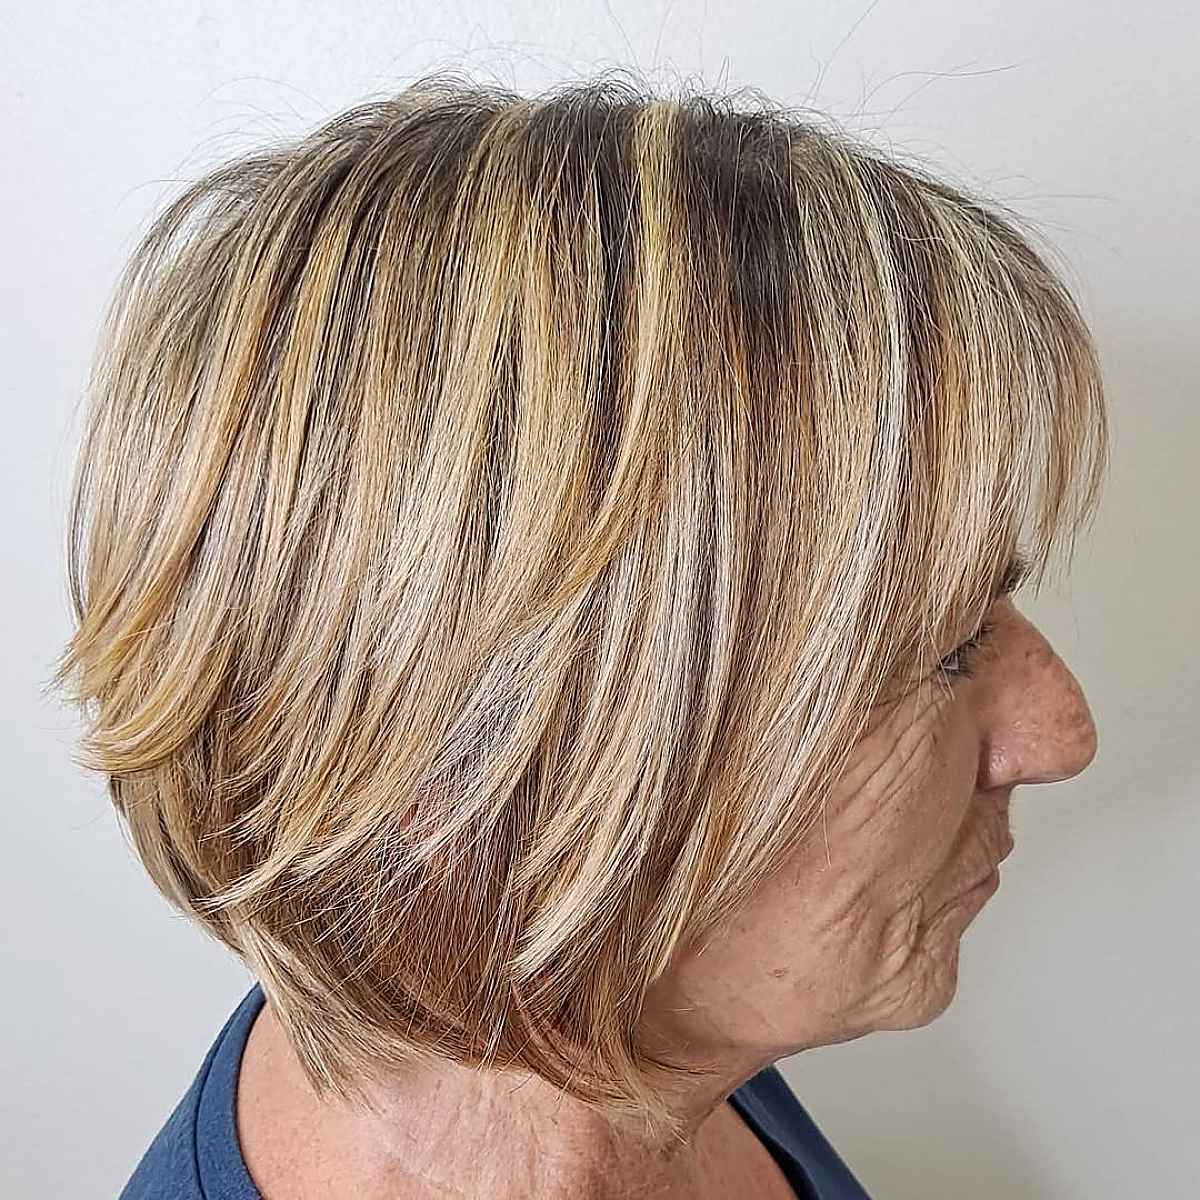 15 Trendy Layered Bobs for Fine Hair to Look Fuller